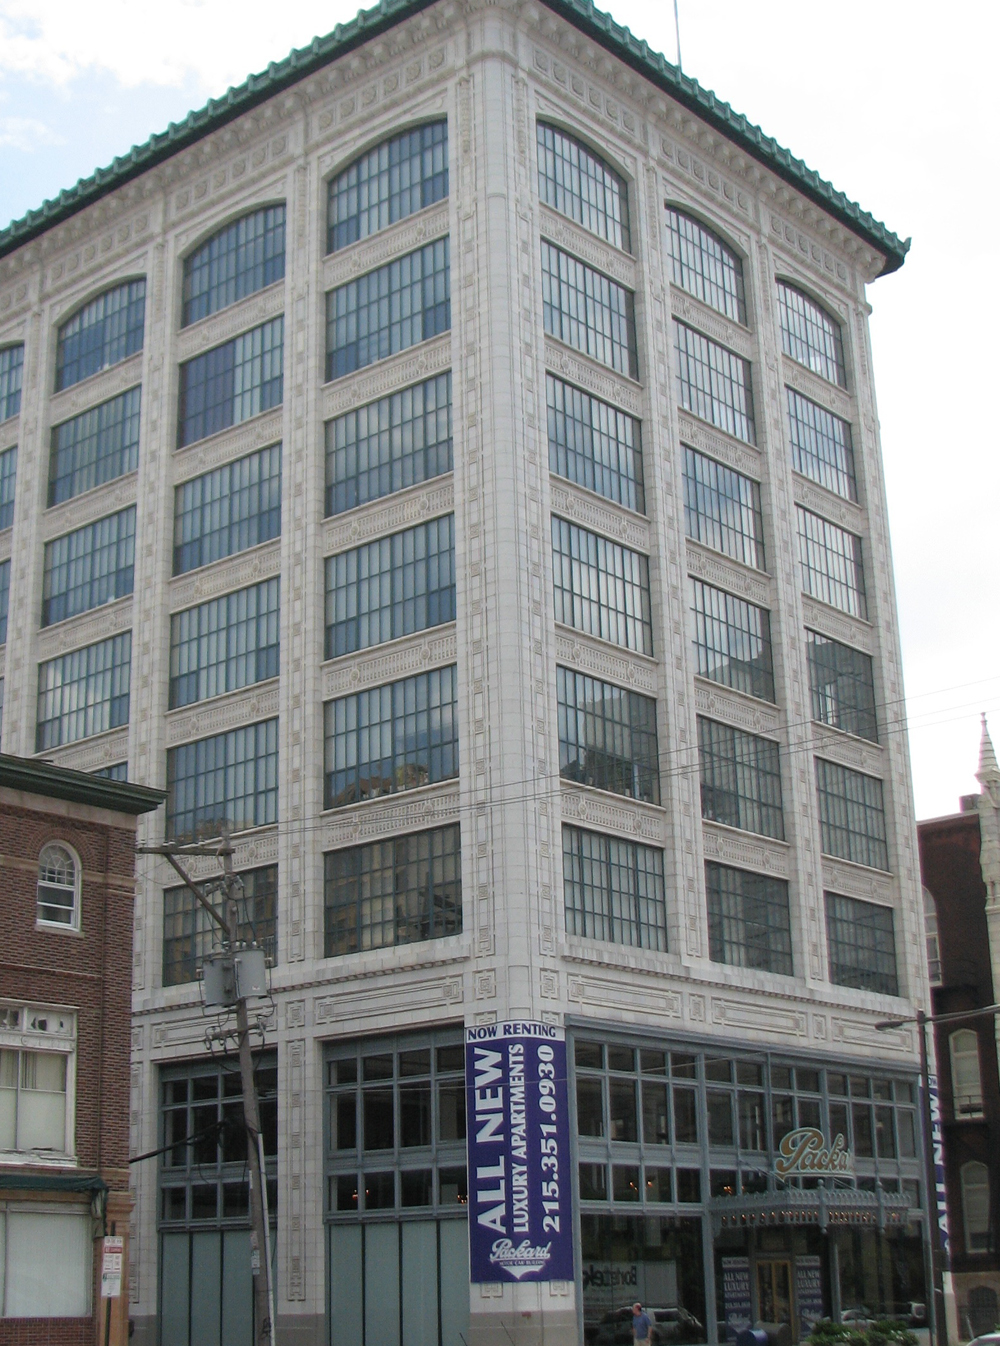 Albert Kahn designed the Packard Motor Company Building in the Commercial style. 